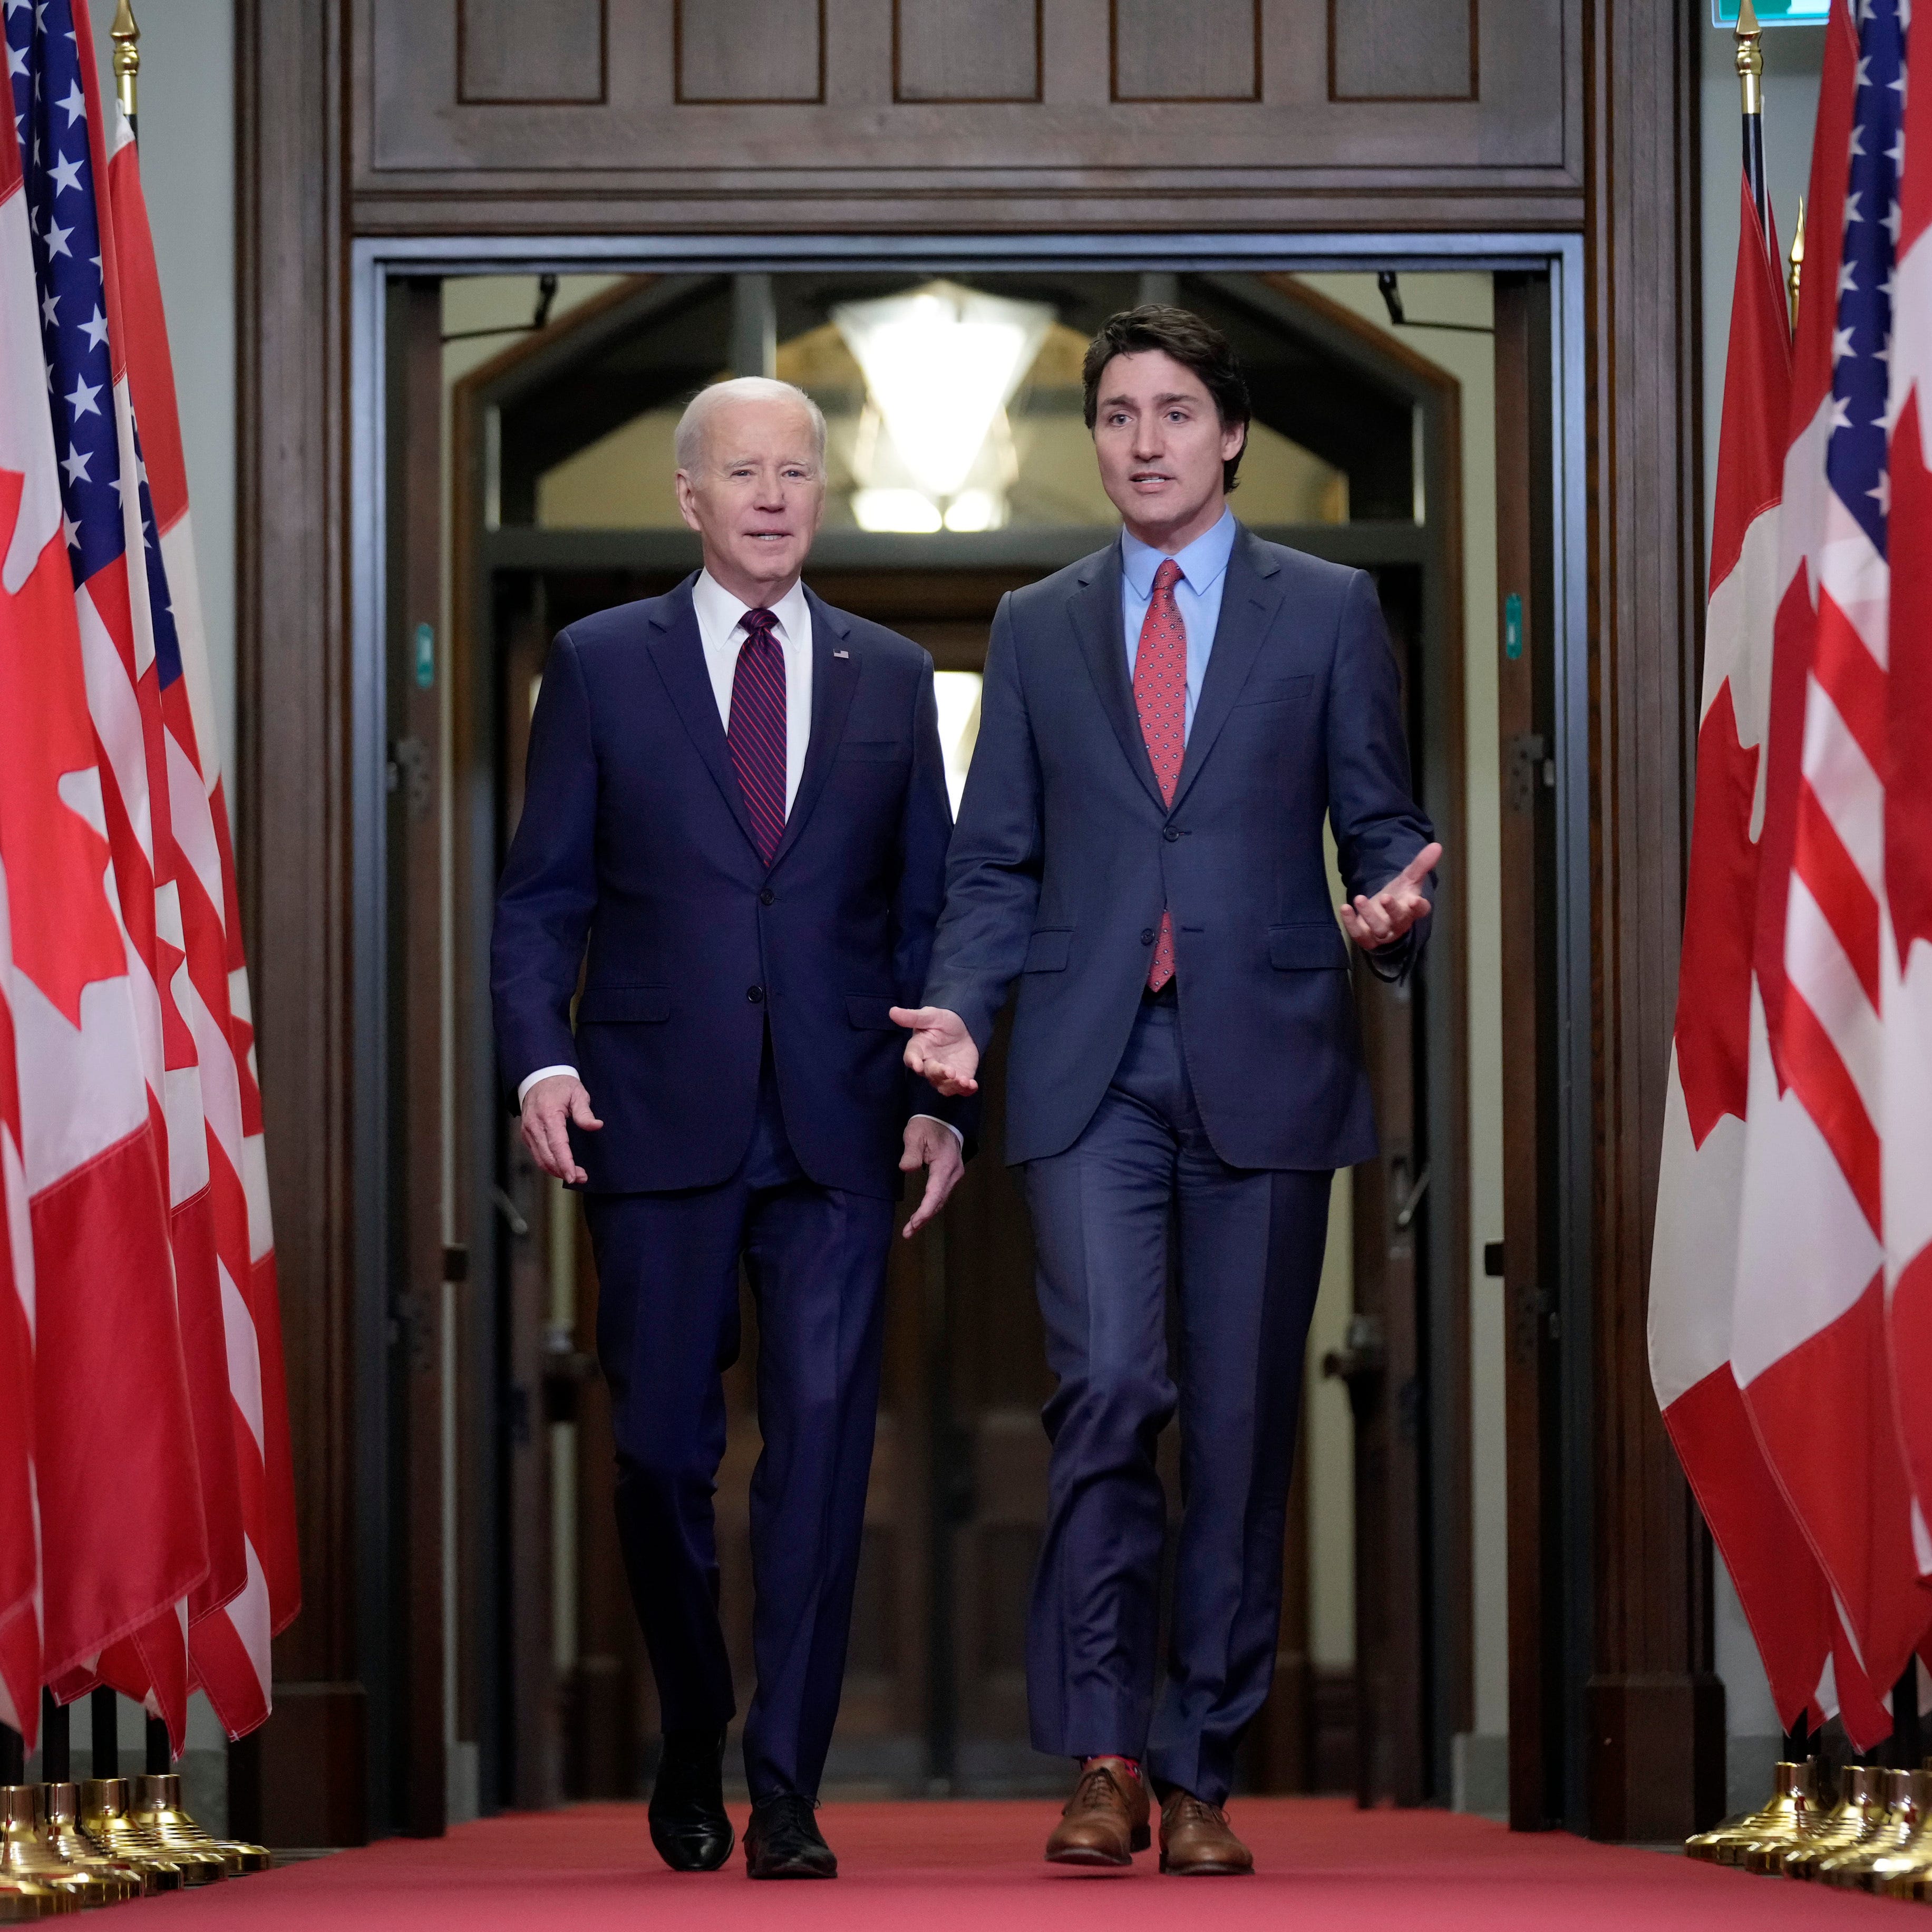 President Joe Biden walks with Canadian Prime Minister Justin Trudeau during an arrival ceremony at Parliament Hill, Friday, March 24, 2023, in Ottawa, Canada. (AP Photo/Andrew Harnik)